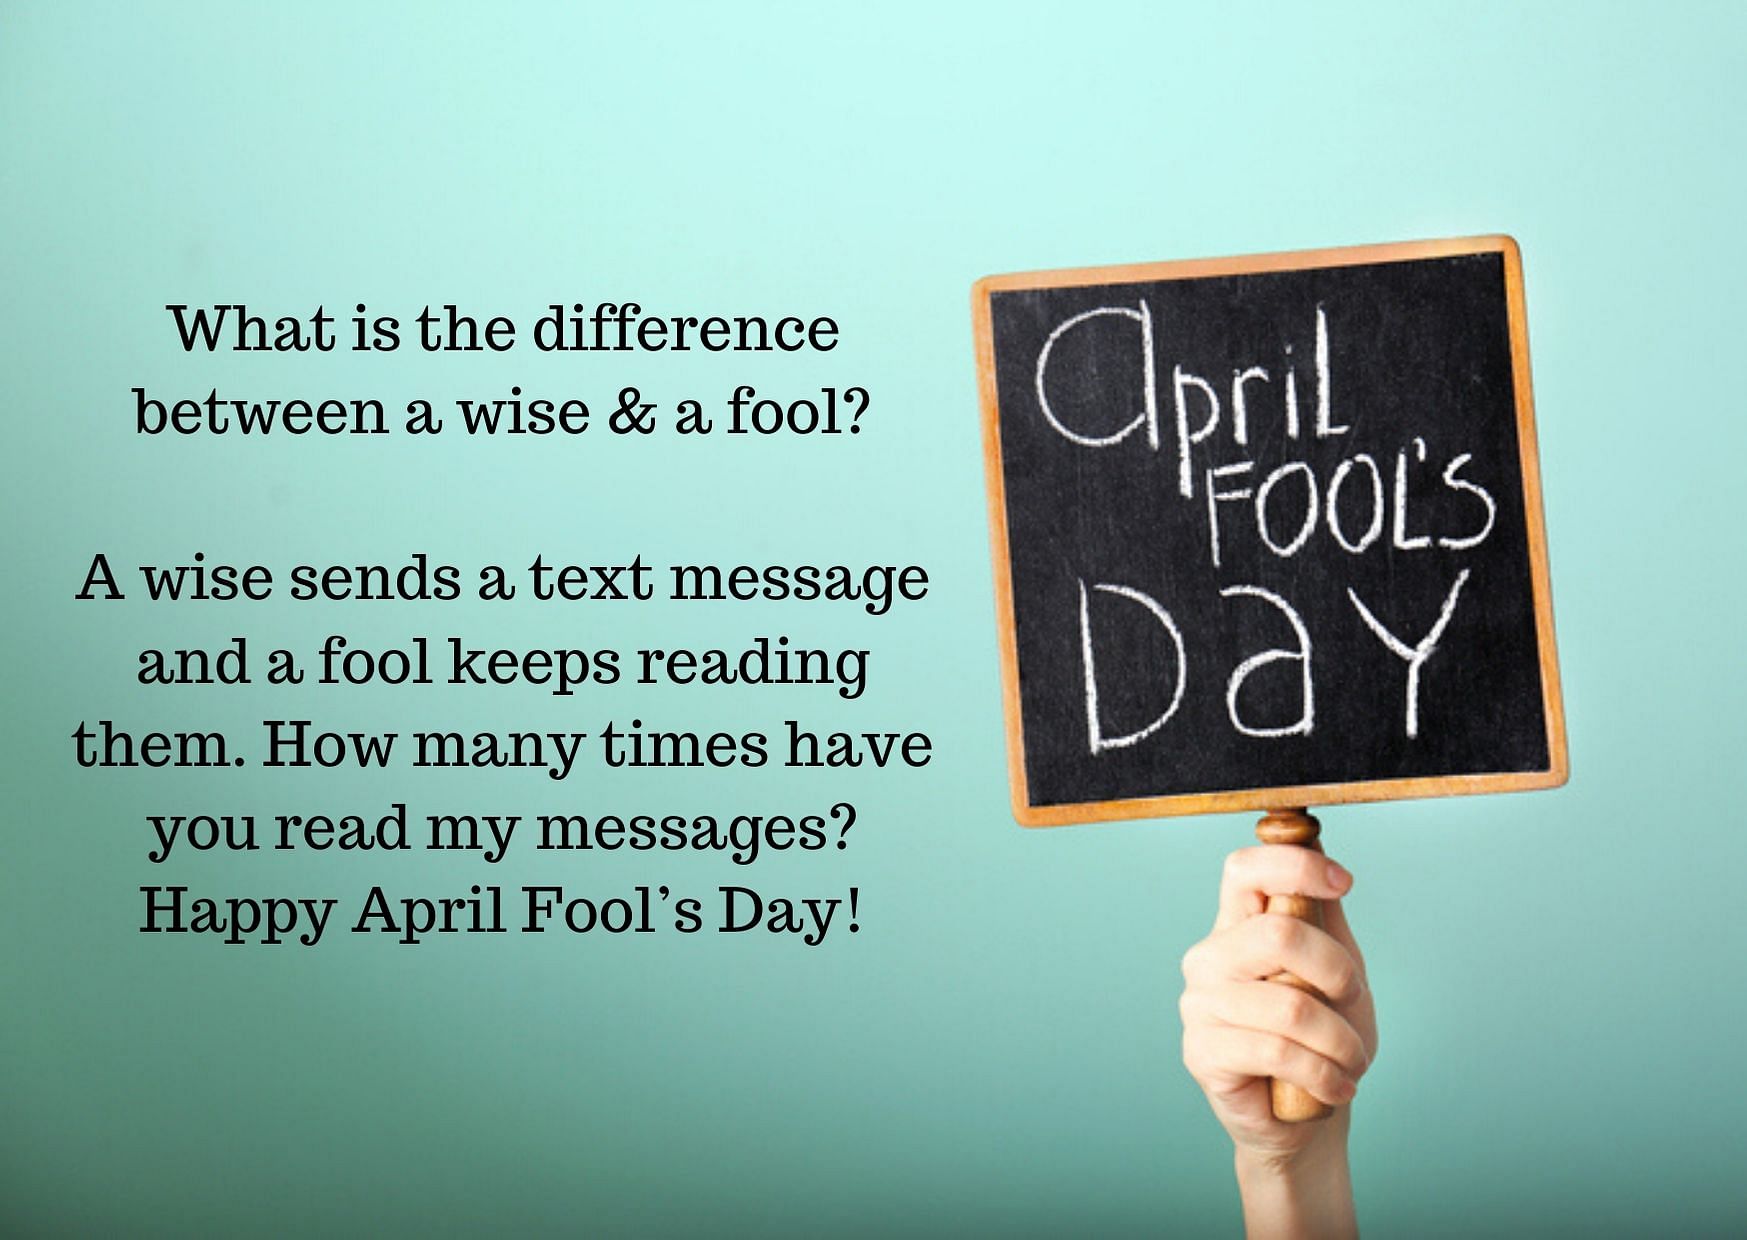 April Fools' Day 2022: Funny Messages, Images, Memes and Jokes